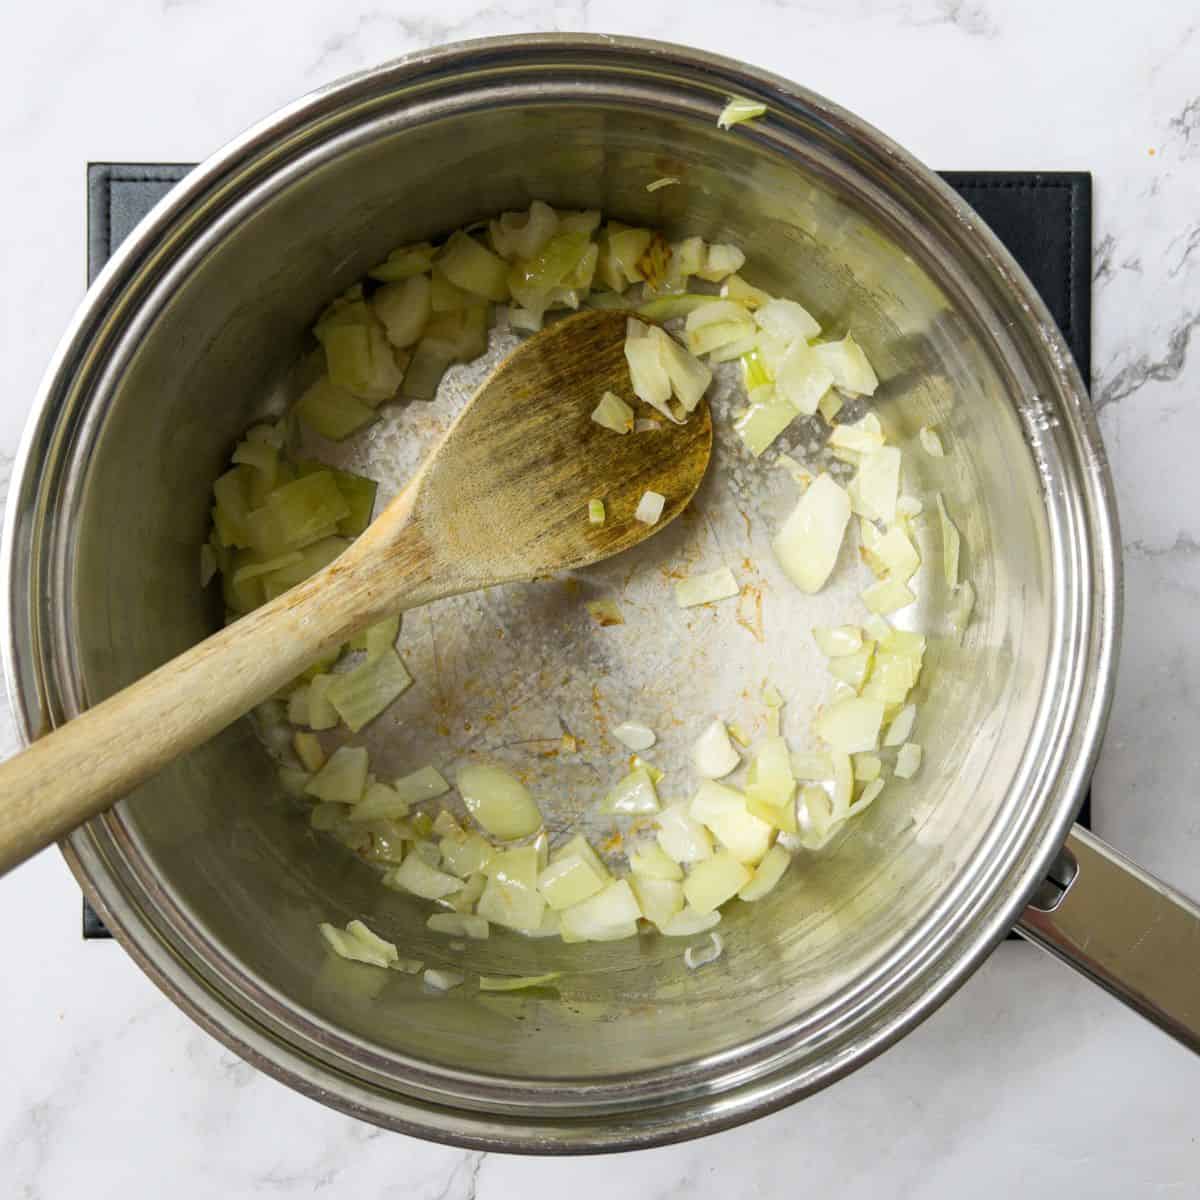 Diced onion frying in a saucepan, being stirred with a wooden spoon.